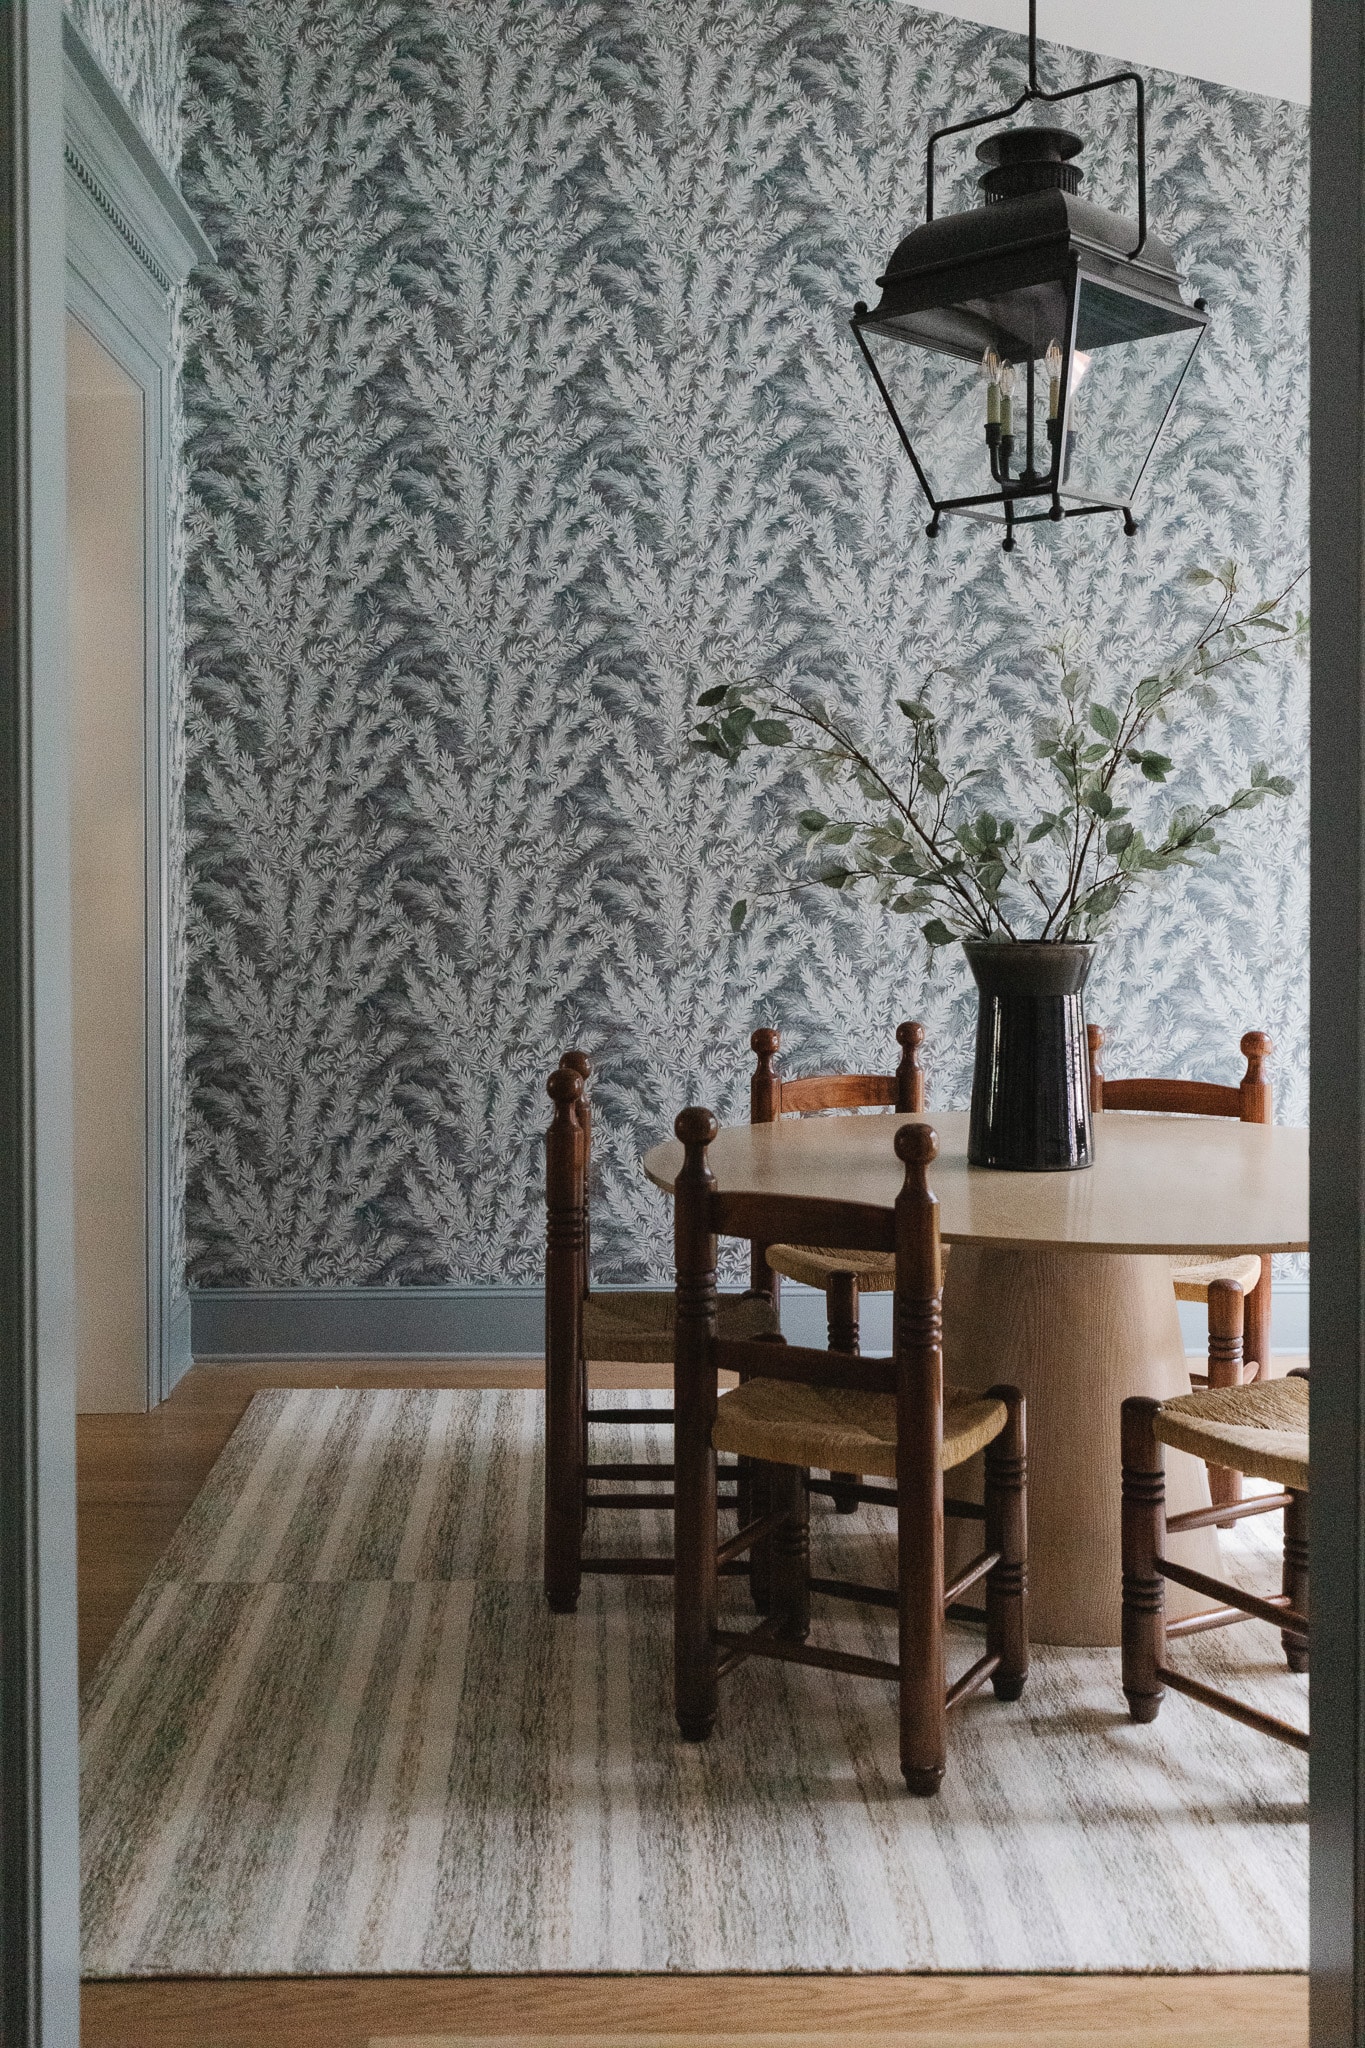 The Dining Room Wallpaper is in! - Chris Loves Julia